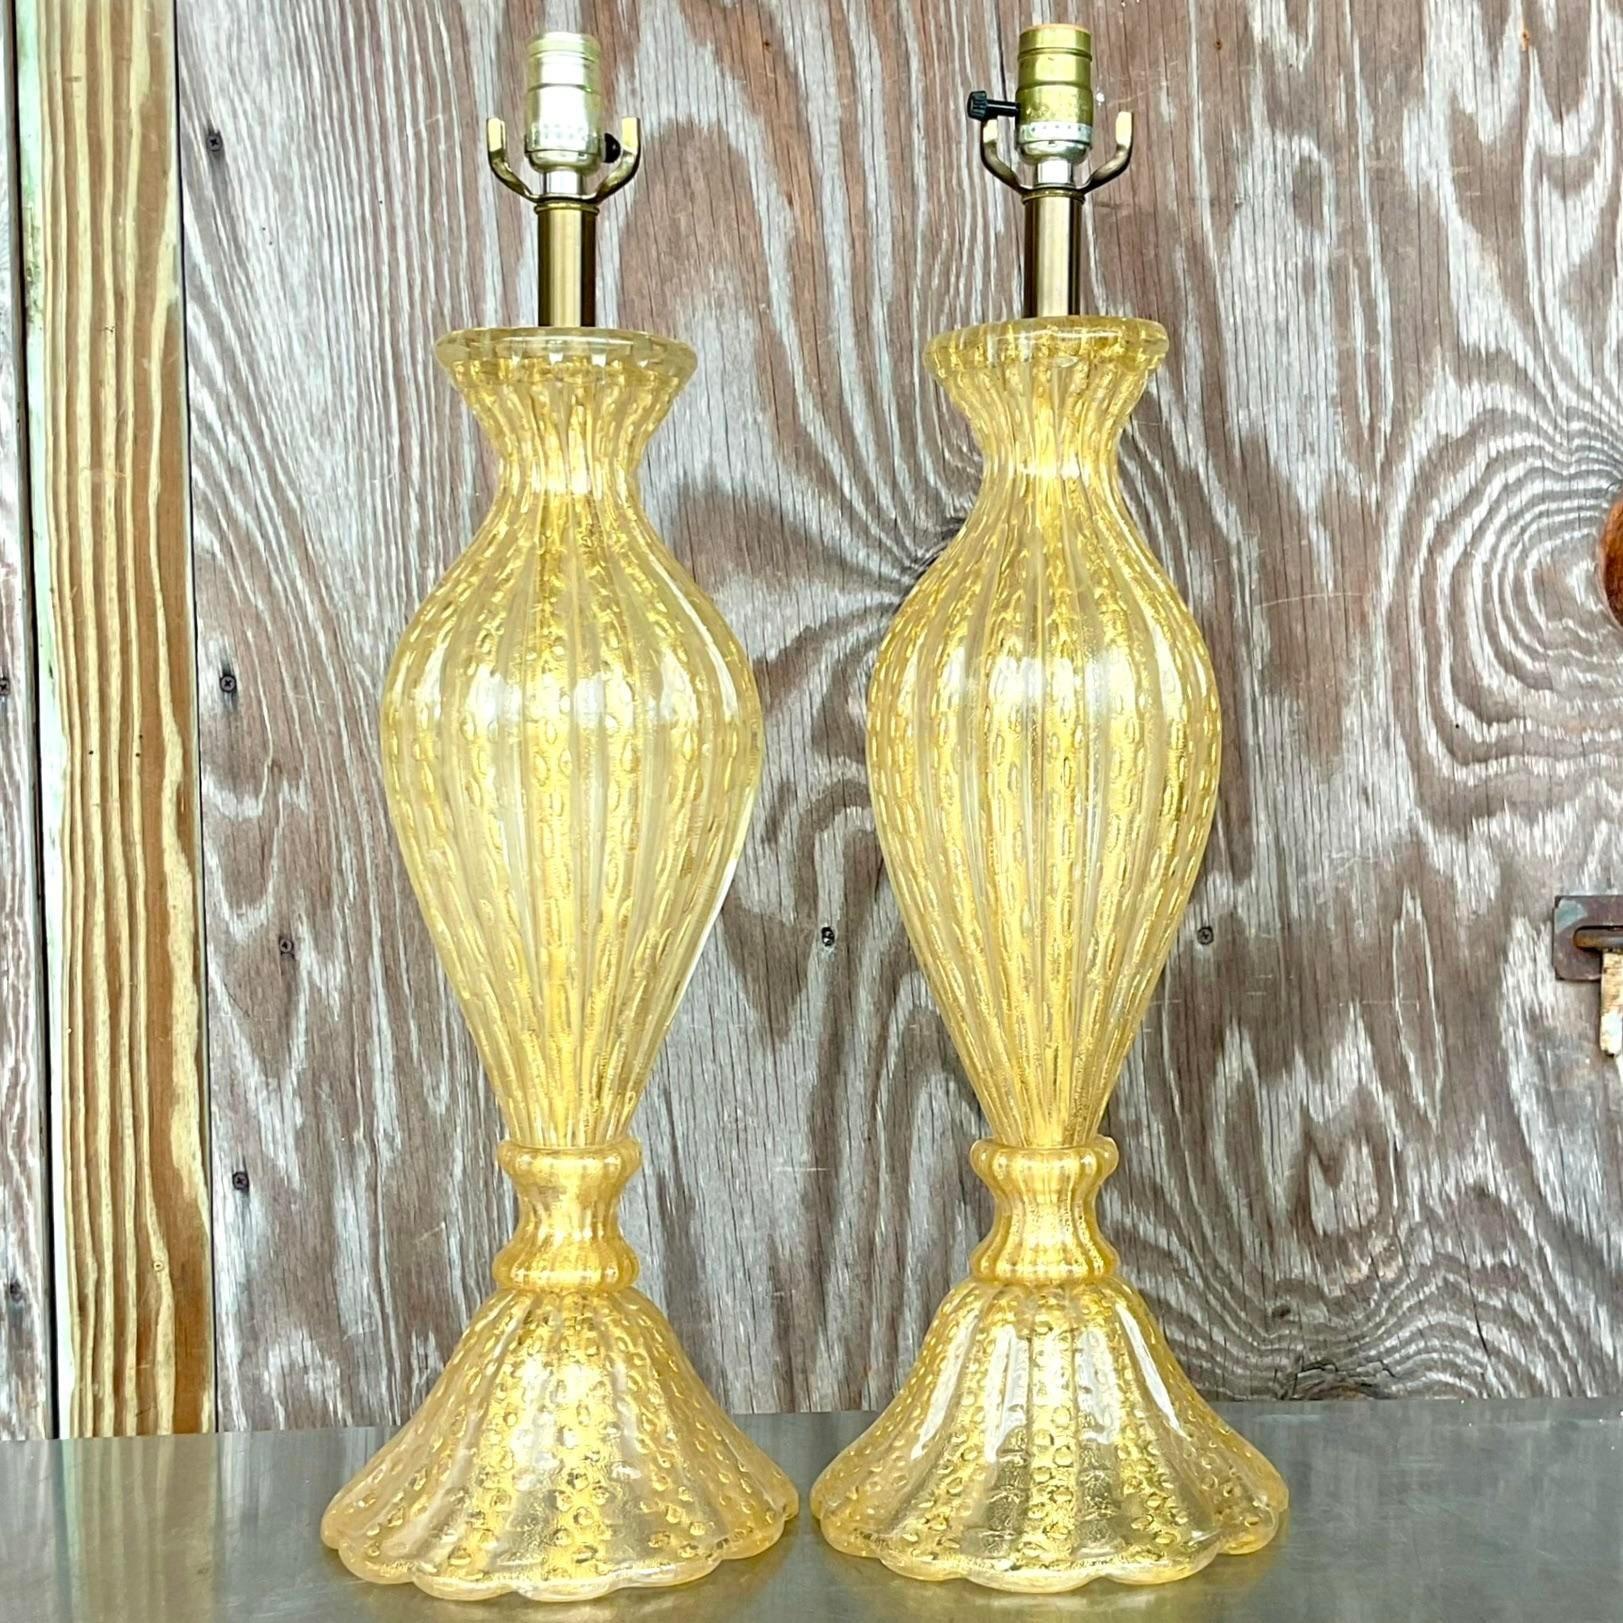 A fabulous pair of vintage Regency table lamps. Made by the Murano group in Italy. Beautiful gold coloration makes it the perfect neutral for so many spaces. Acquired from a Palm Beach estate. 